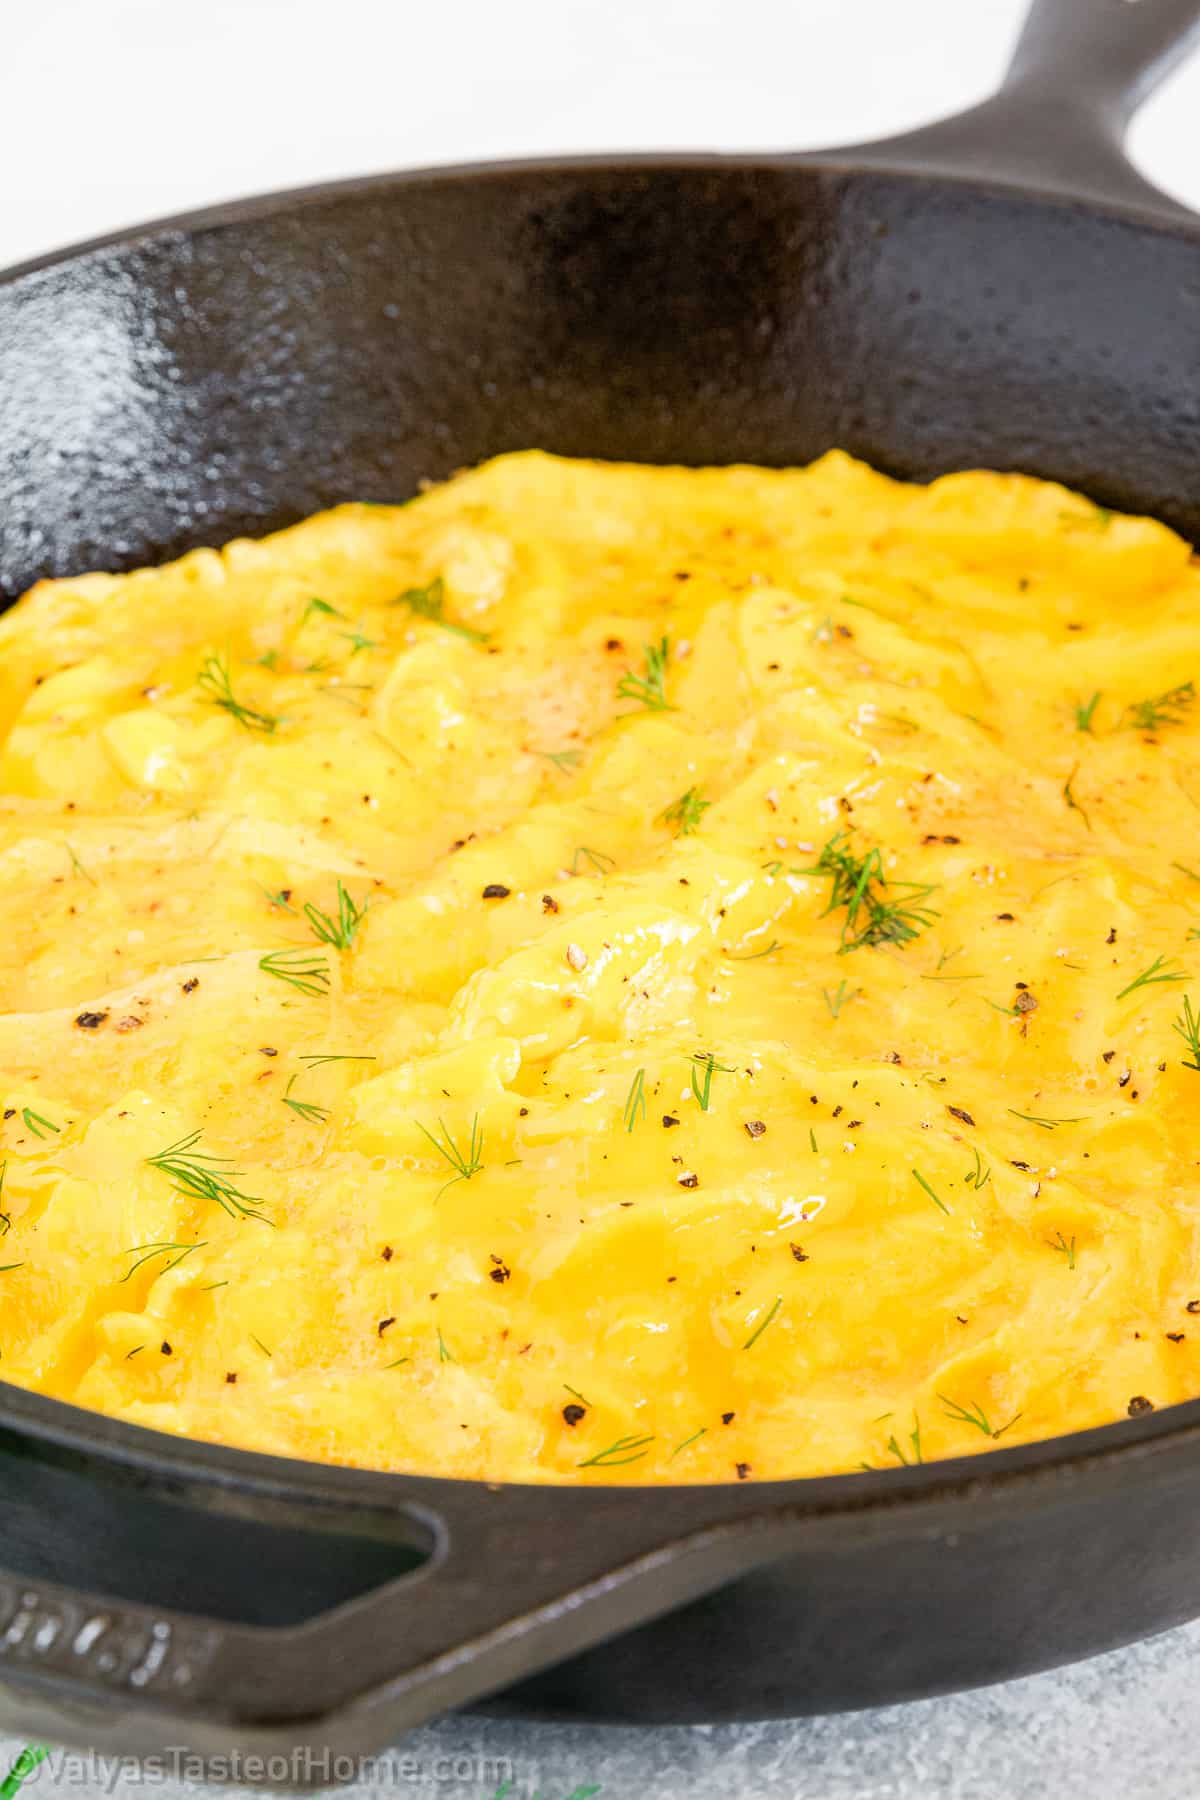 https://www.valyastasteofhome.com/wp-content/uploads/2017/10/How-to-Make-Scrambled-Eggs-Perfectly-Fluffy-Every-Time-2.jpg